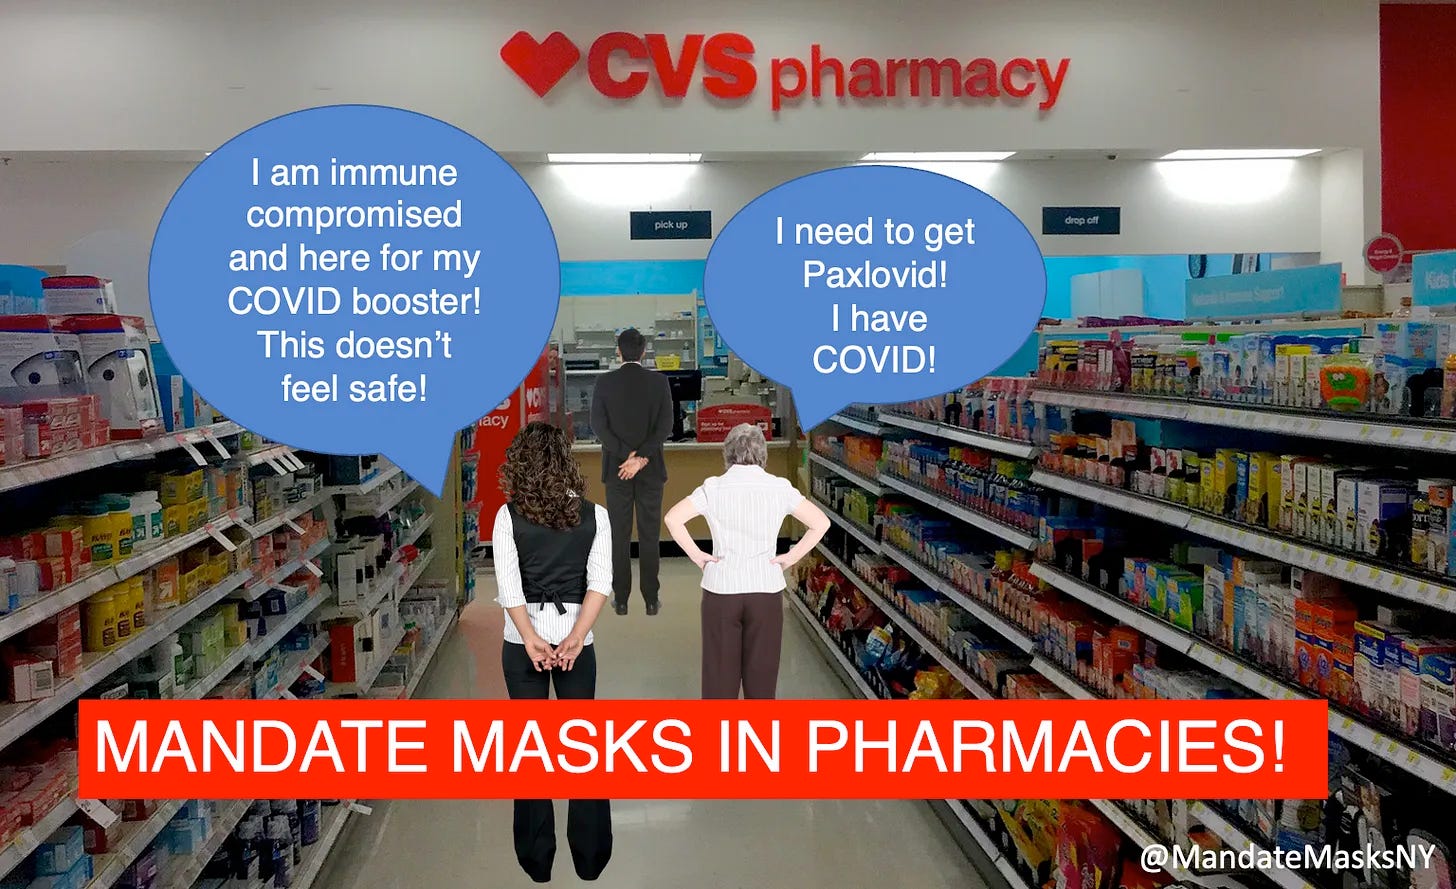 3 people are standing in line in the CVS Pharmacy drug store aisle, one person says I am immune compromised and here for my covid booster! This doesn’t feel safe! and the other person says I need to get paxlovid! I have covid! The caption reads Mandate Masks in Pharmacies! by @mandatemasksny